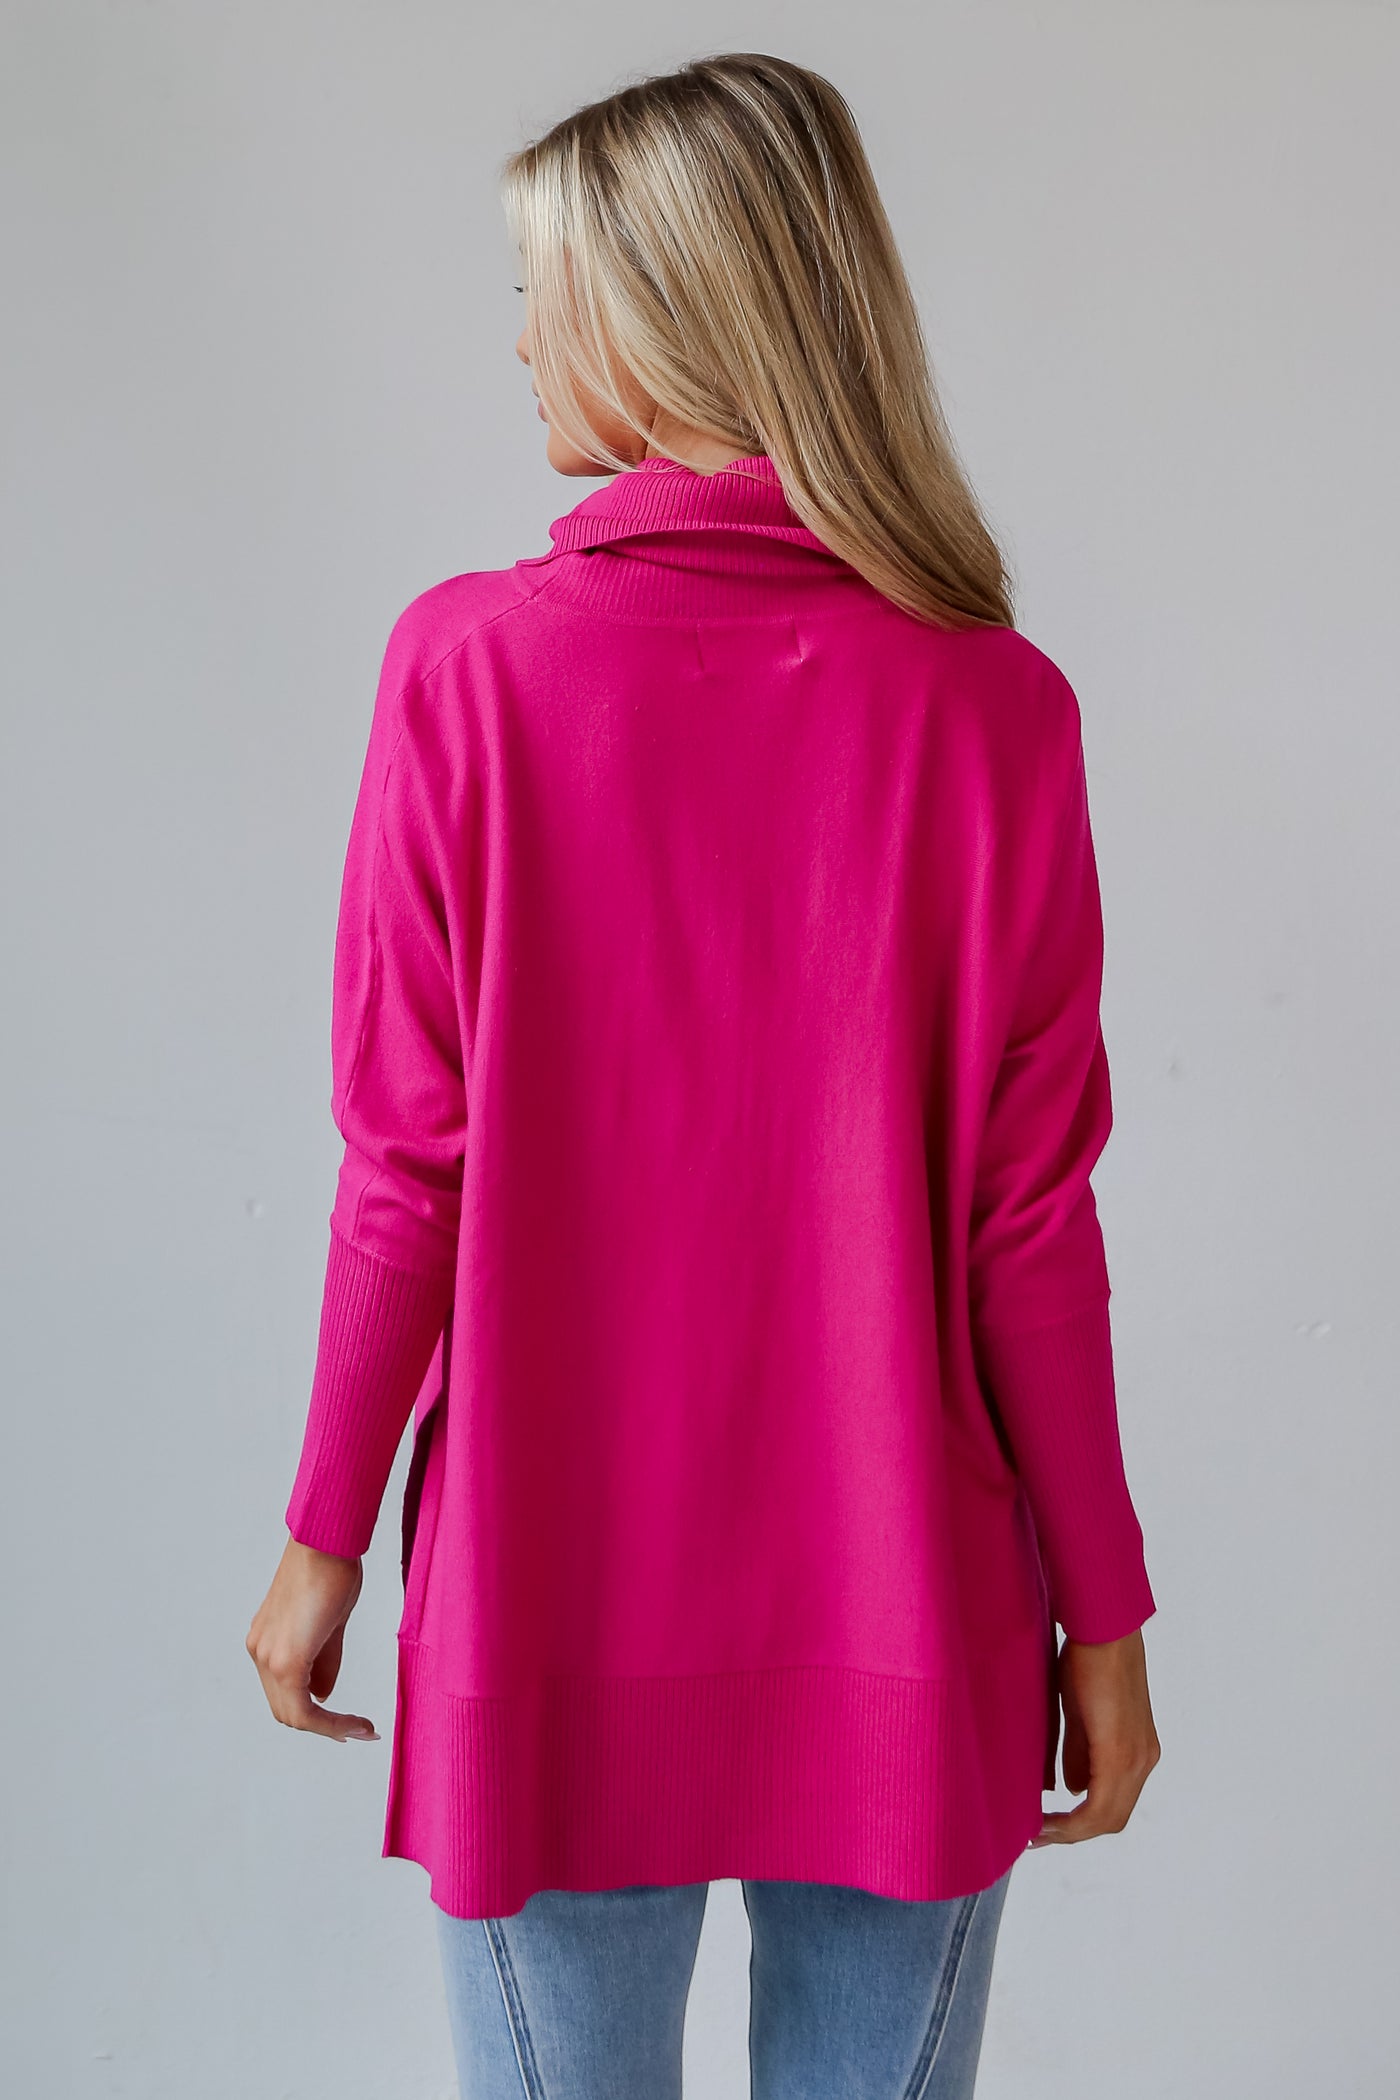 pink Turtleneck Oversized Sweater back view